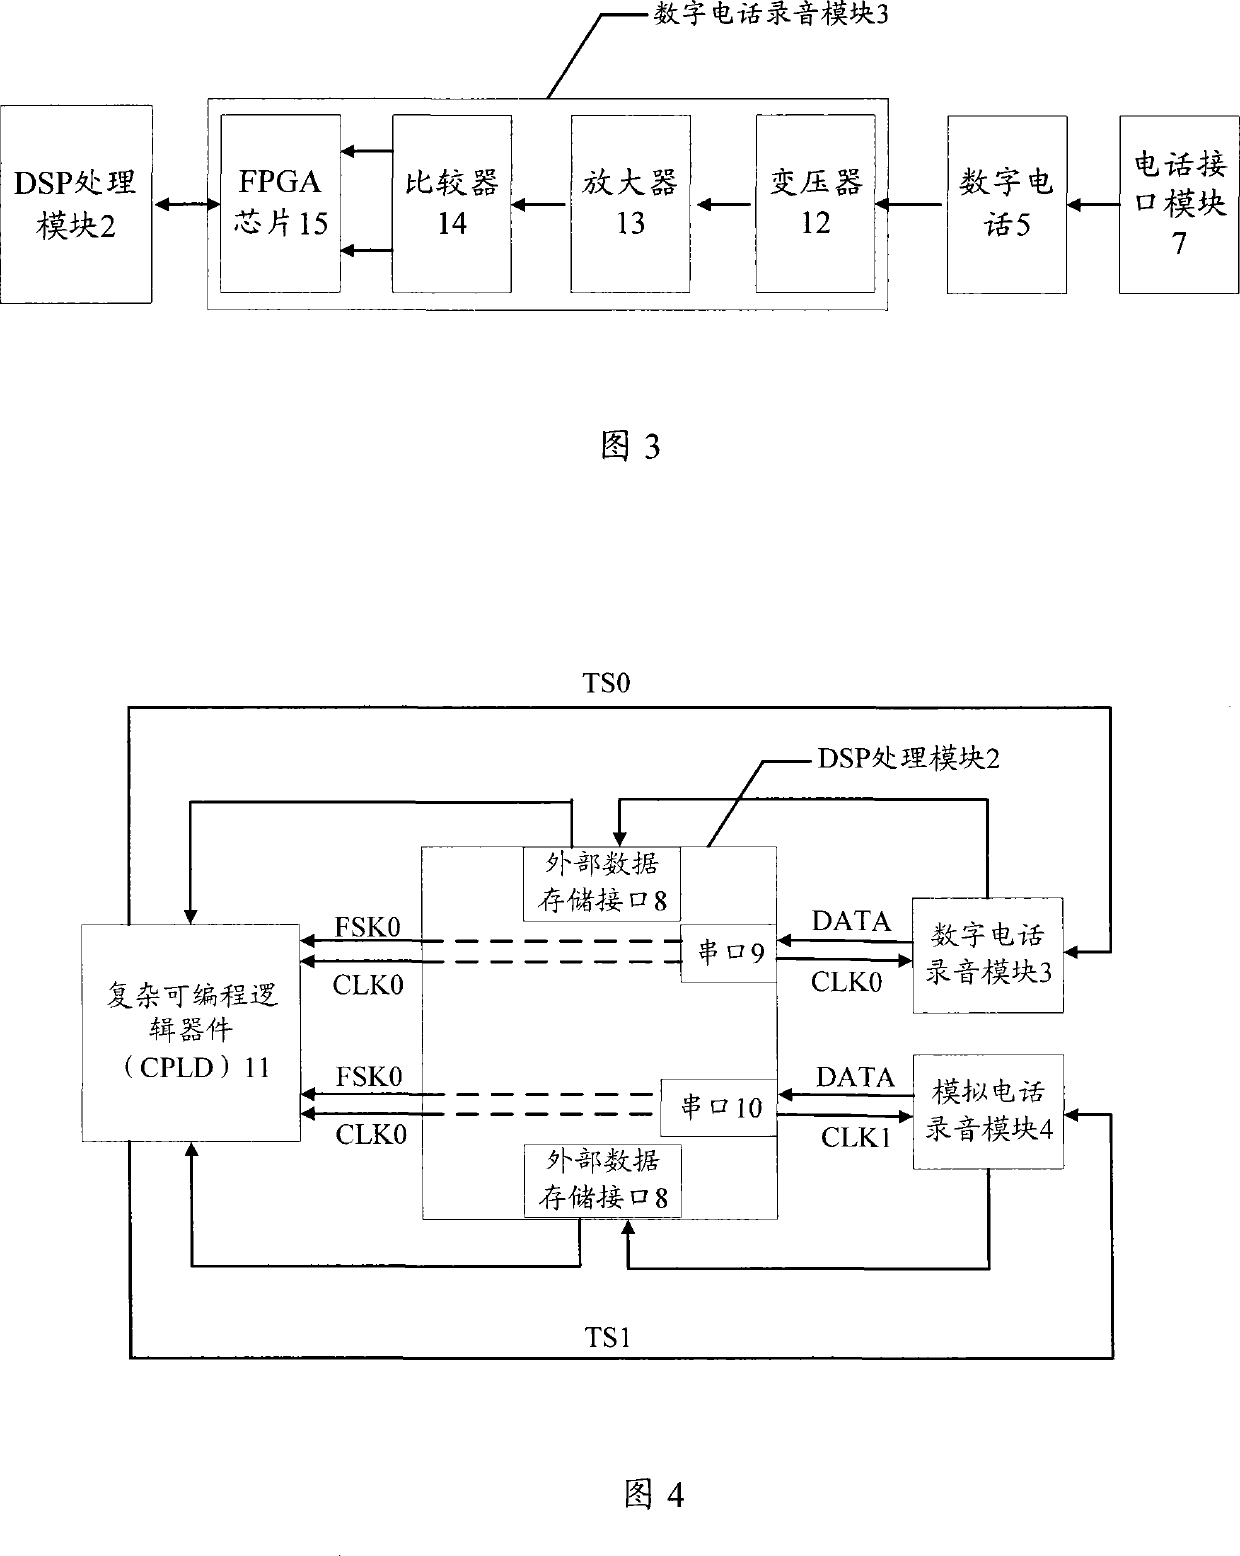 Telephone sound-recording system and implementing method thereof